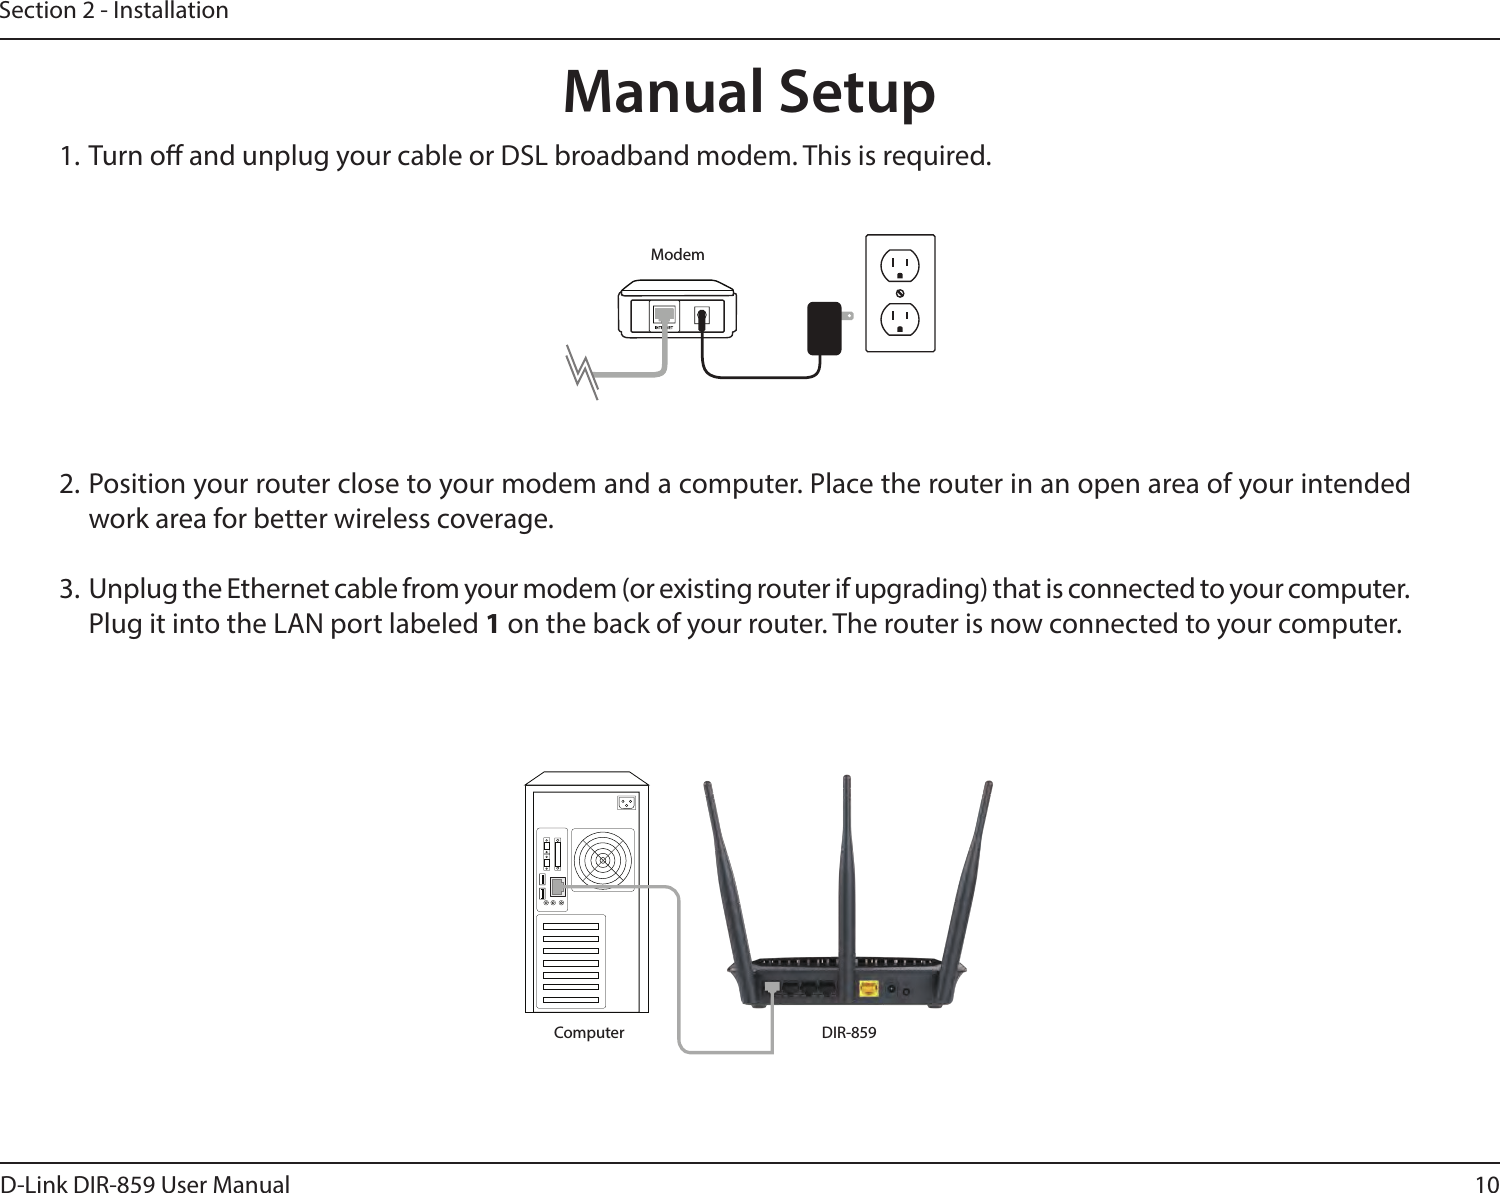 10D-Link DIR-859 User ManualSection 2 - Installation41. Turn o and unplug your cable or DSL broadband modem. This is required.Manual Setup2. Position your router close to your modem and a computer. Place the router in an open area of your intended work area for better wireless coverage.3.  Unplug the Ethernet cable from your modem (or existing router if upgrading) that is connected to your computer. Plug it into the LAN port labeled 1 on the back of your router. The router is now connected to your computer.DIR-859ComputerModem